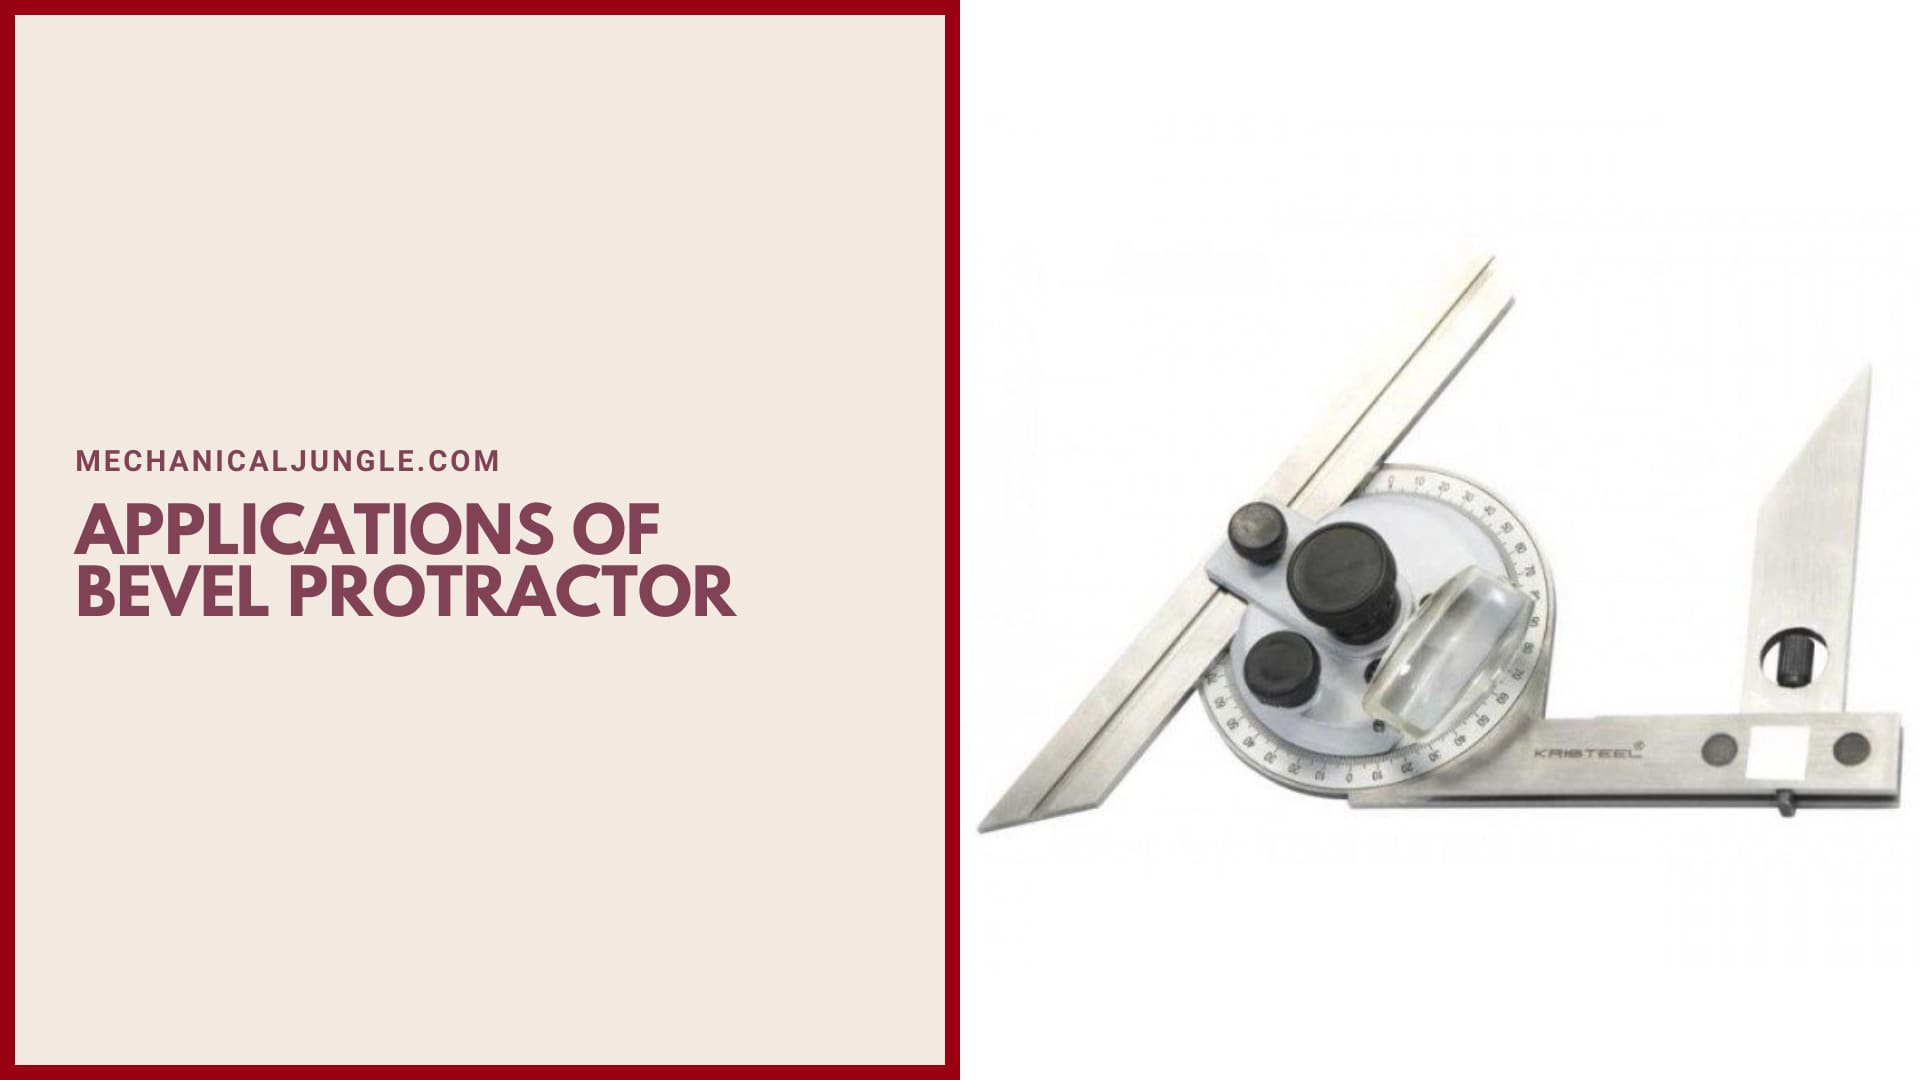 Applications of Bevel Protractor